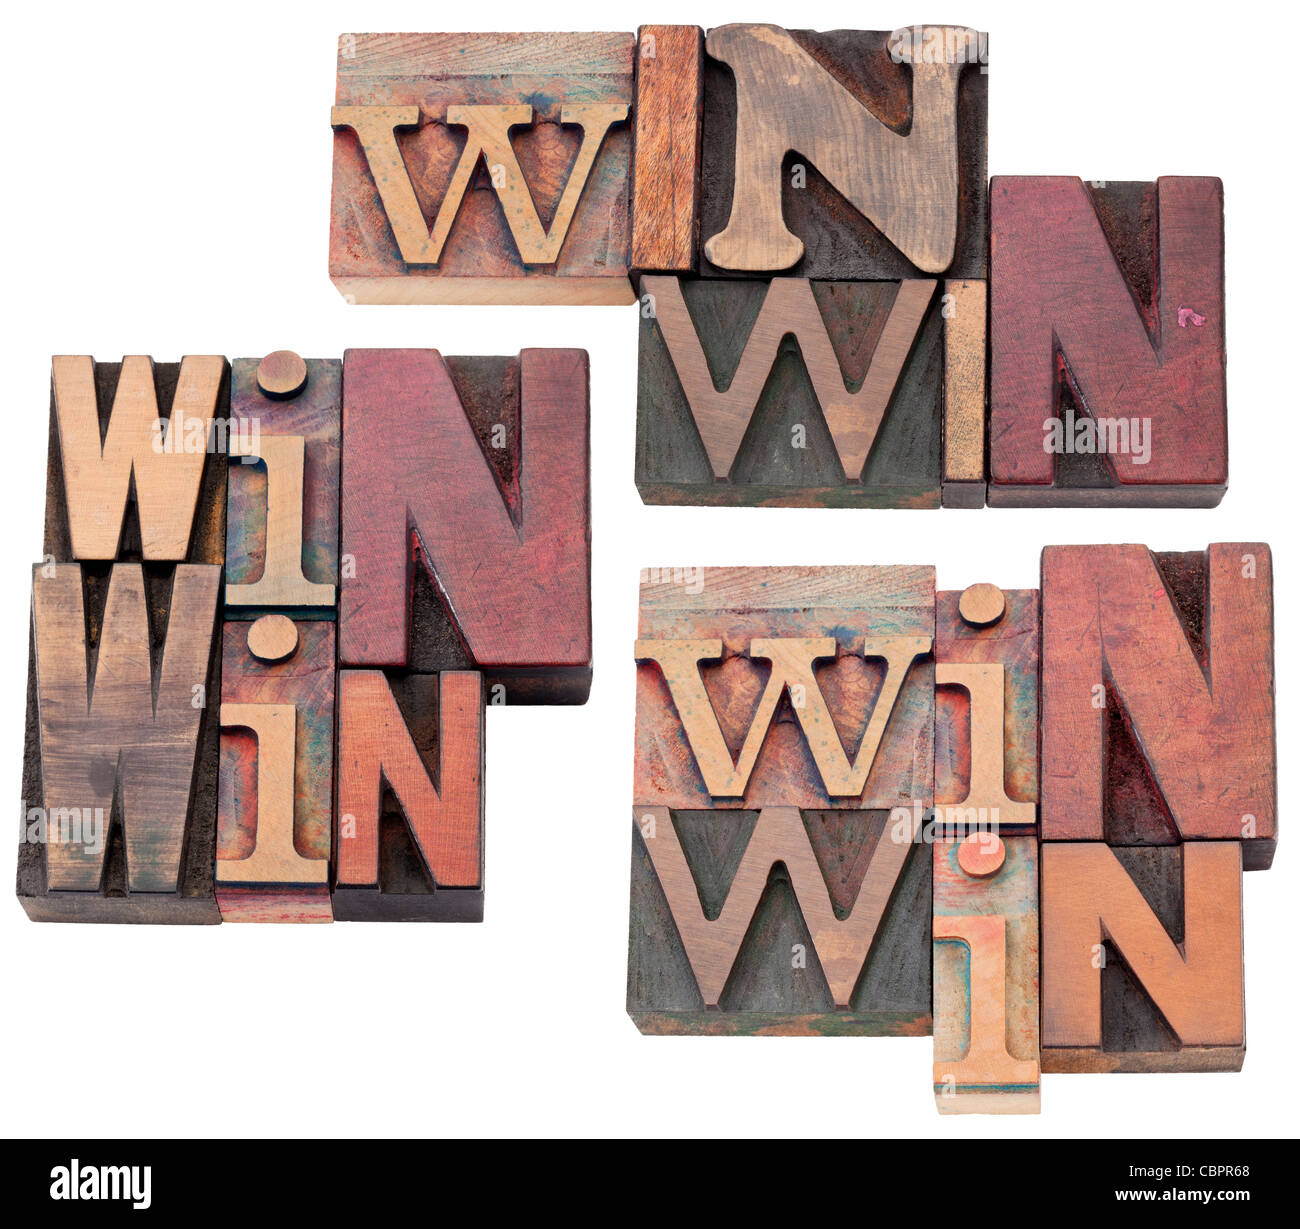 win-win strategy, negotiation or conflict resolution concept - isolated text in vintage wood letterpress type blocks Stock Photo